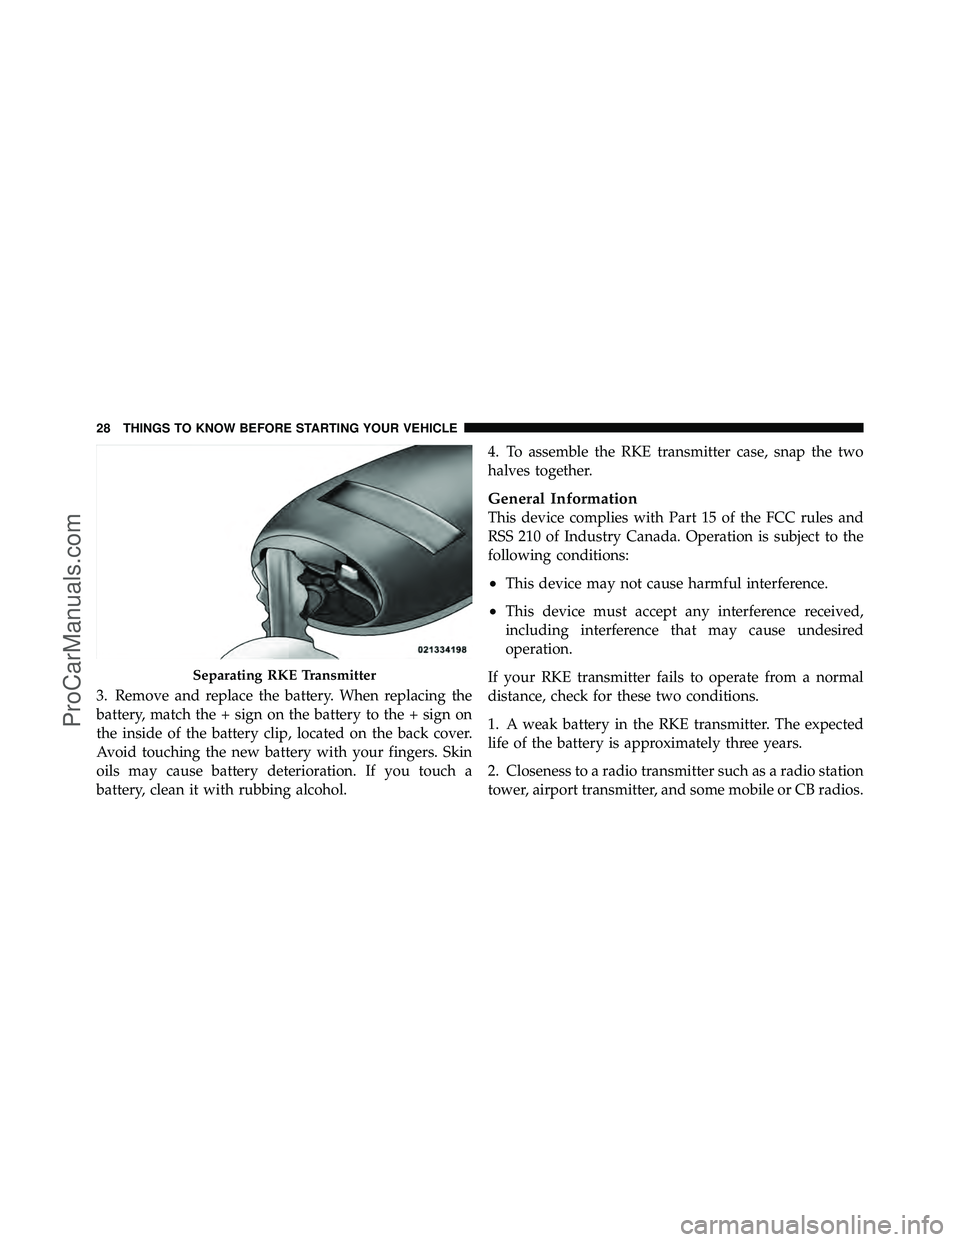 DODGE CARAVAN 2011 Owners Manual 3. Remove and replace the battery. When replacing the
battery, match the + sign on the battery to the + sign on
the inside of the battery clip, located on the back cover.
Avoid touching the new batter